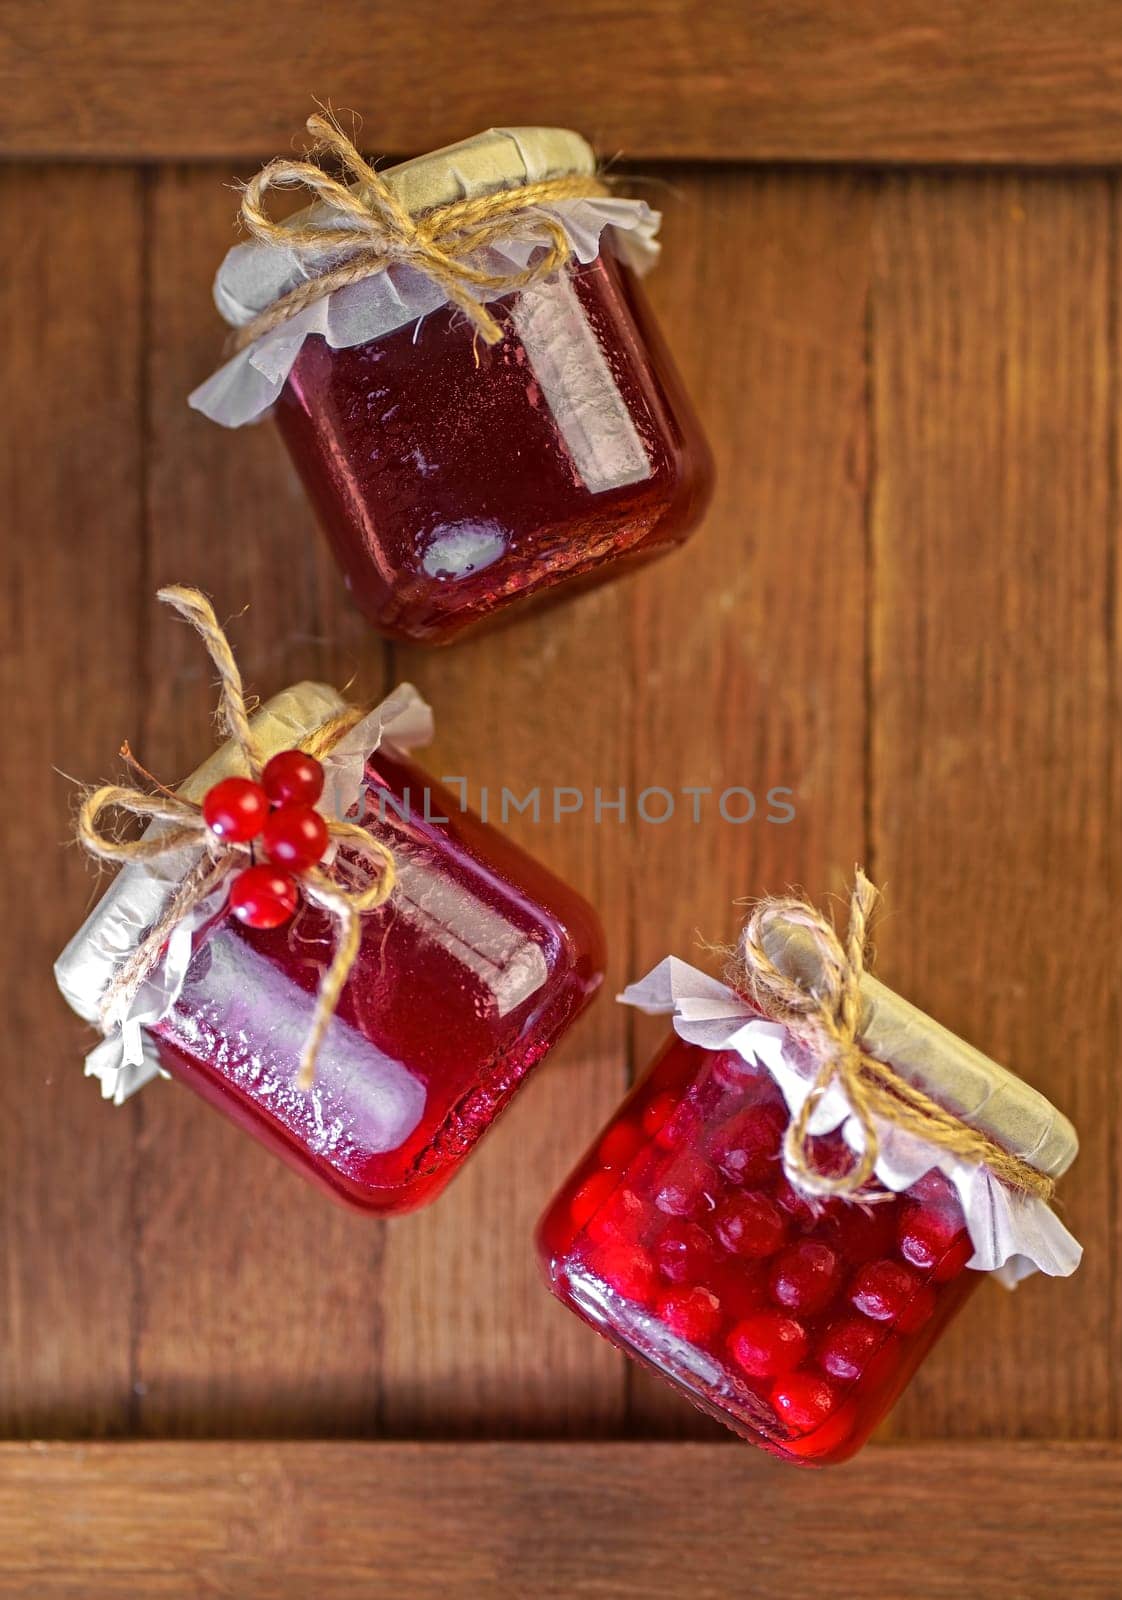 Viburnum fruit jam in a glass jar on a wooden table